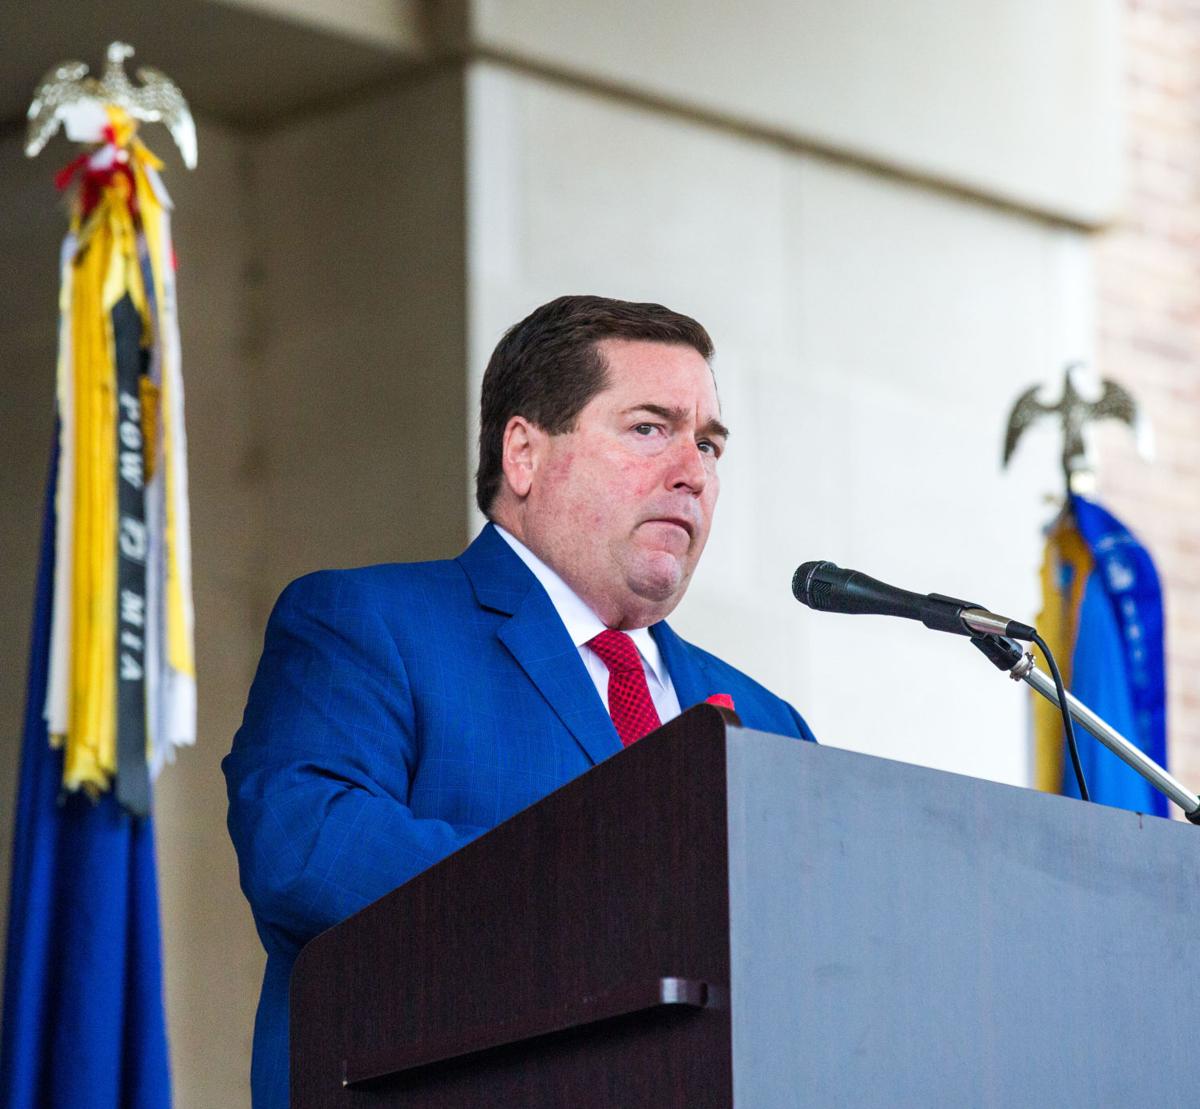 WWL-TV: Lt. Gov. Nungesser celebrates victory after bill grants new leasing powers at state ...